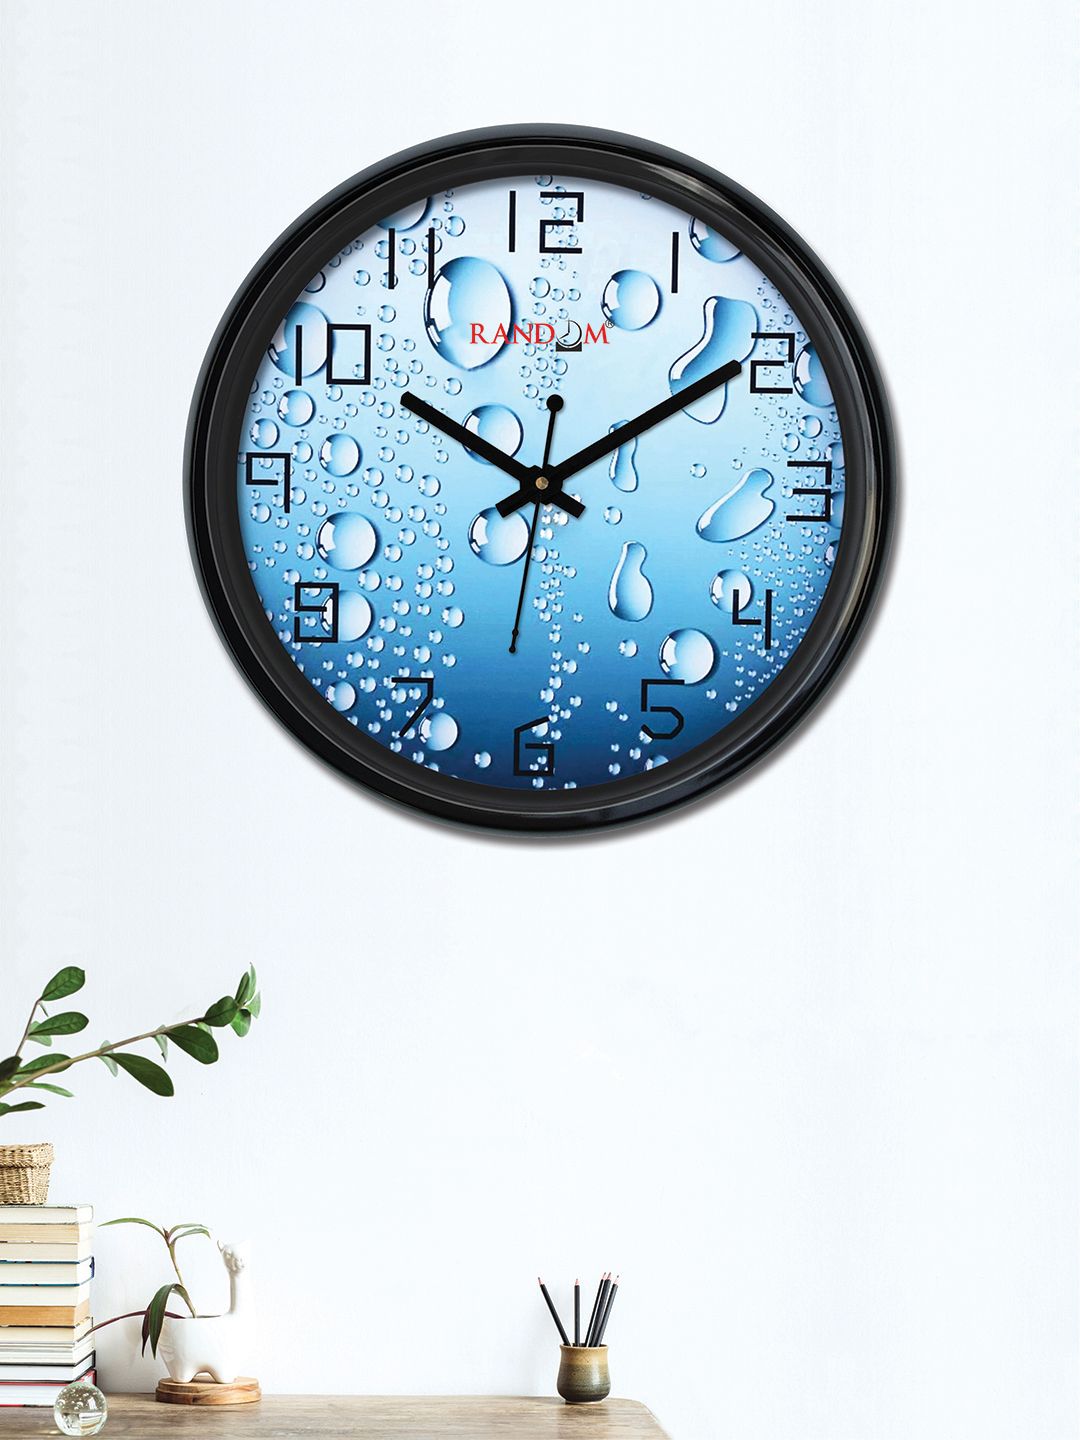 RANDOM Turquoise Blue Round Printed 30cm Analogue Wall Clock Price in India